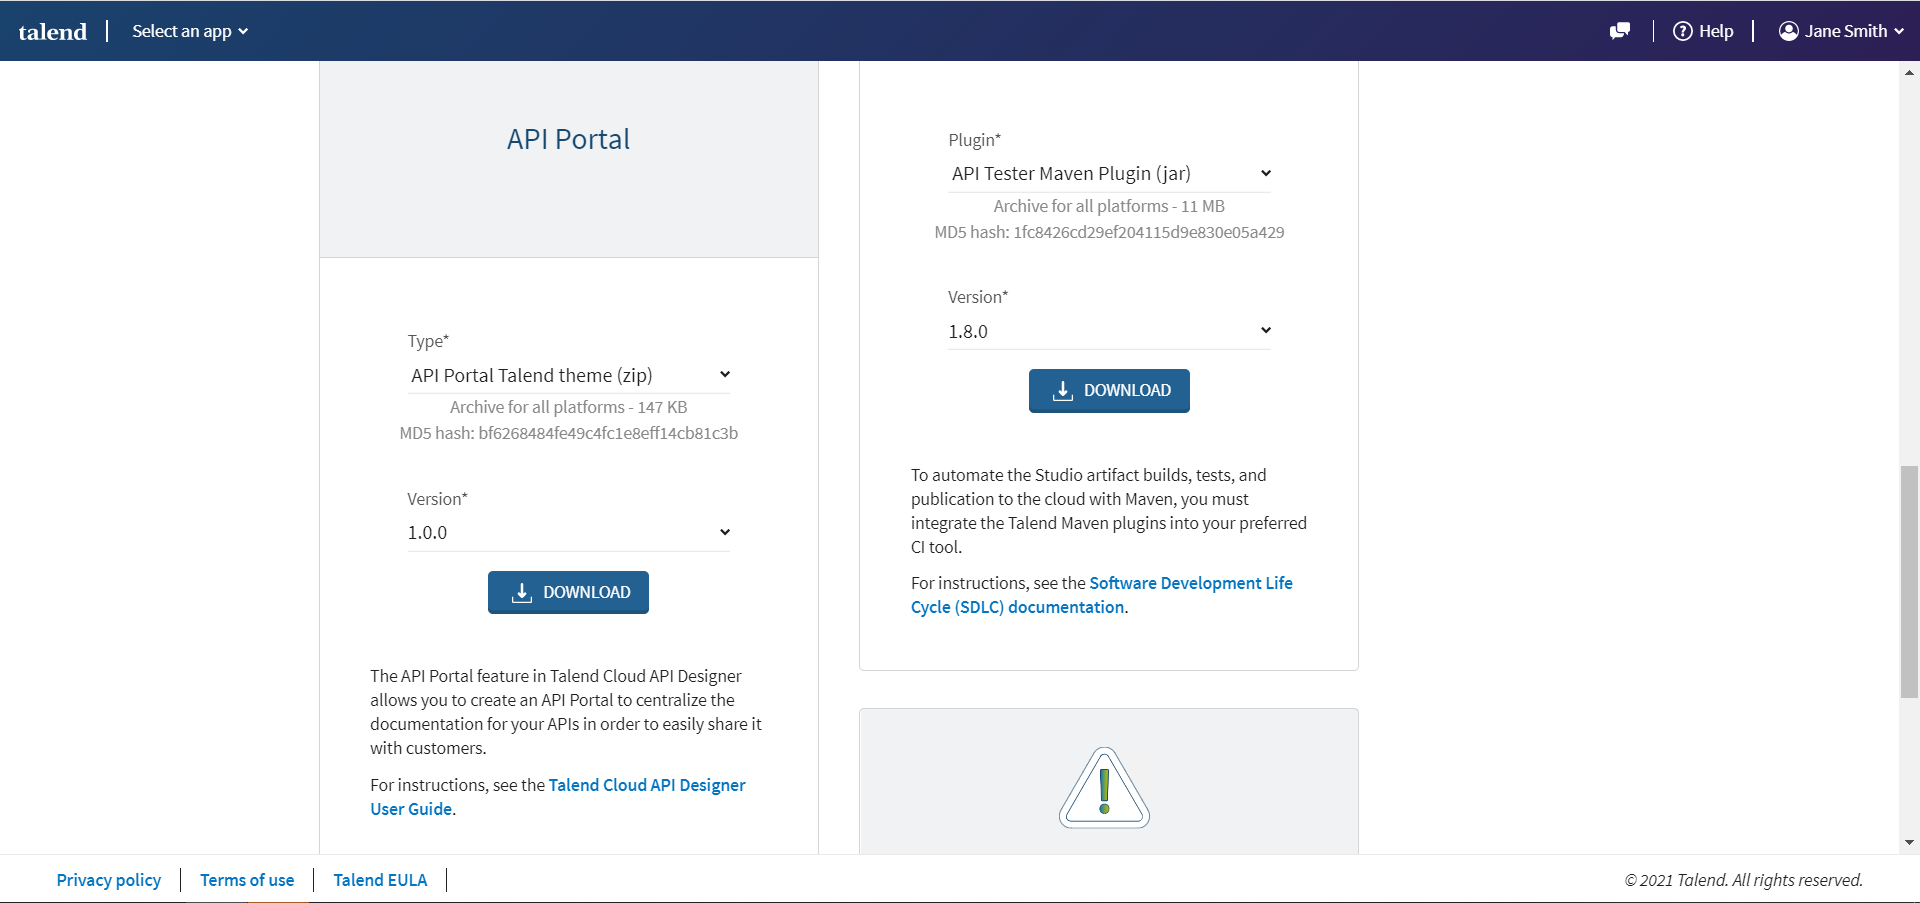 API Portal tile in the Downloads page.